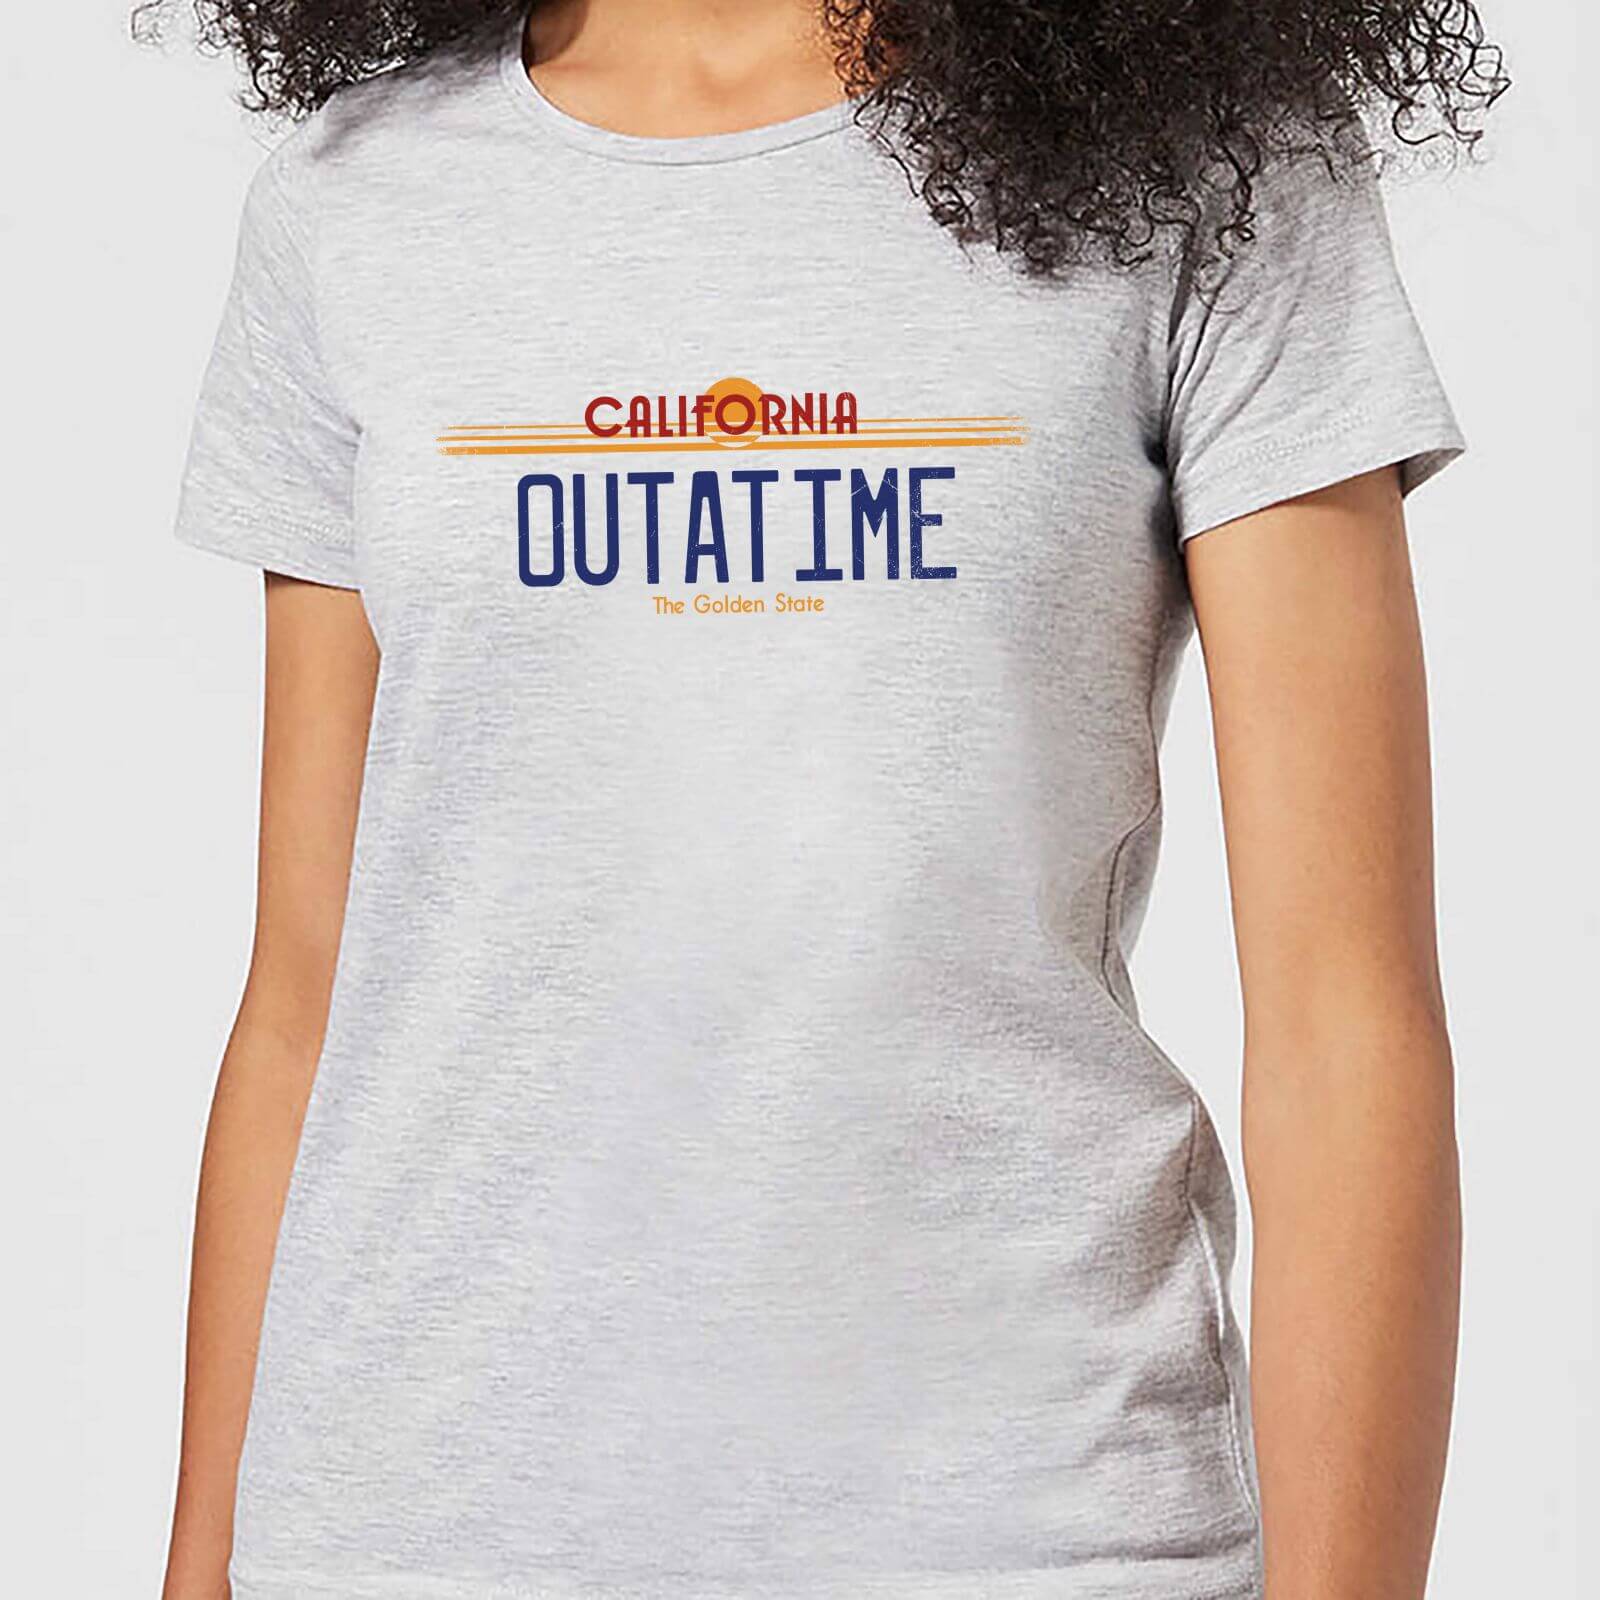 Back To The Future Outatime Plate Women's T-Shirt - Grey - XS